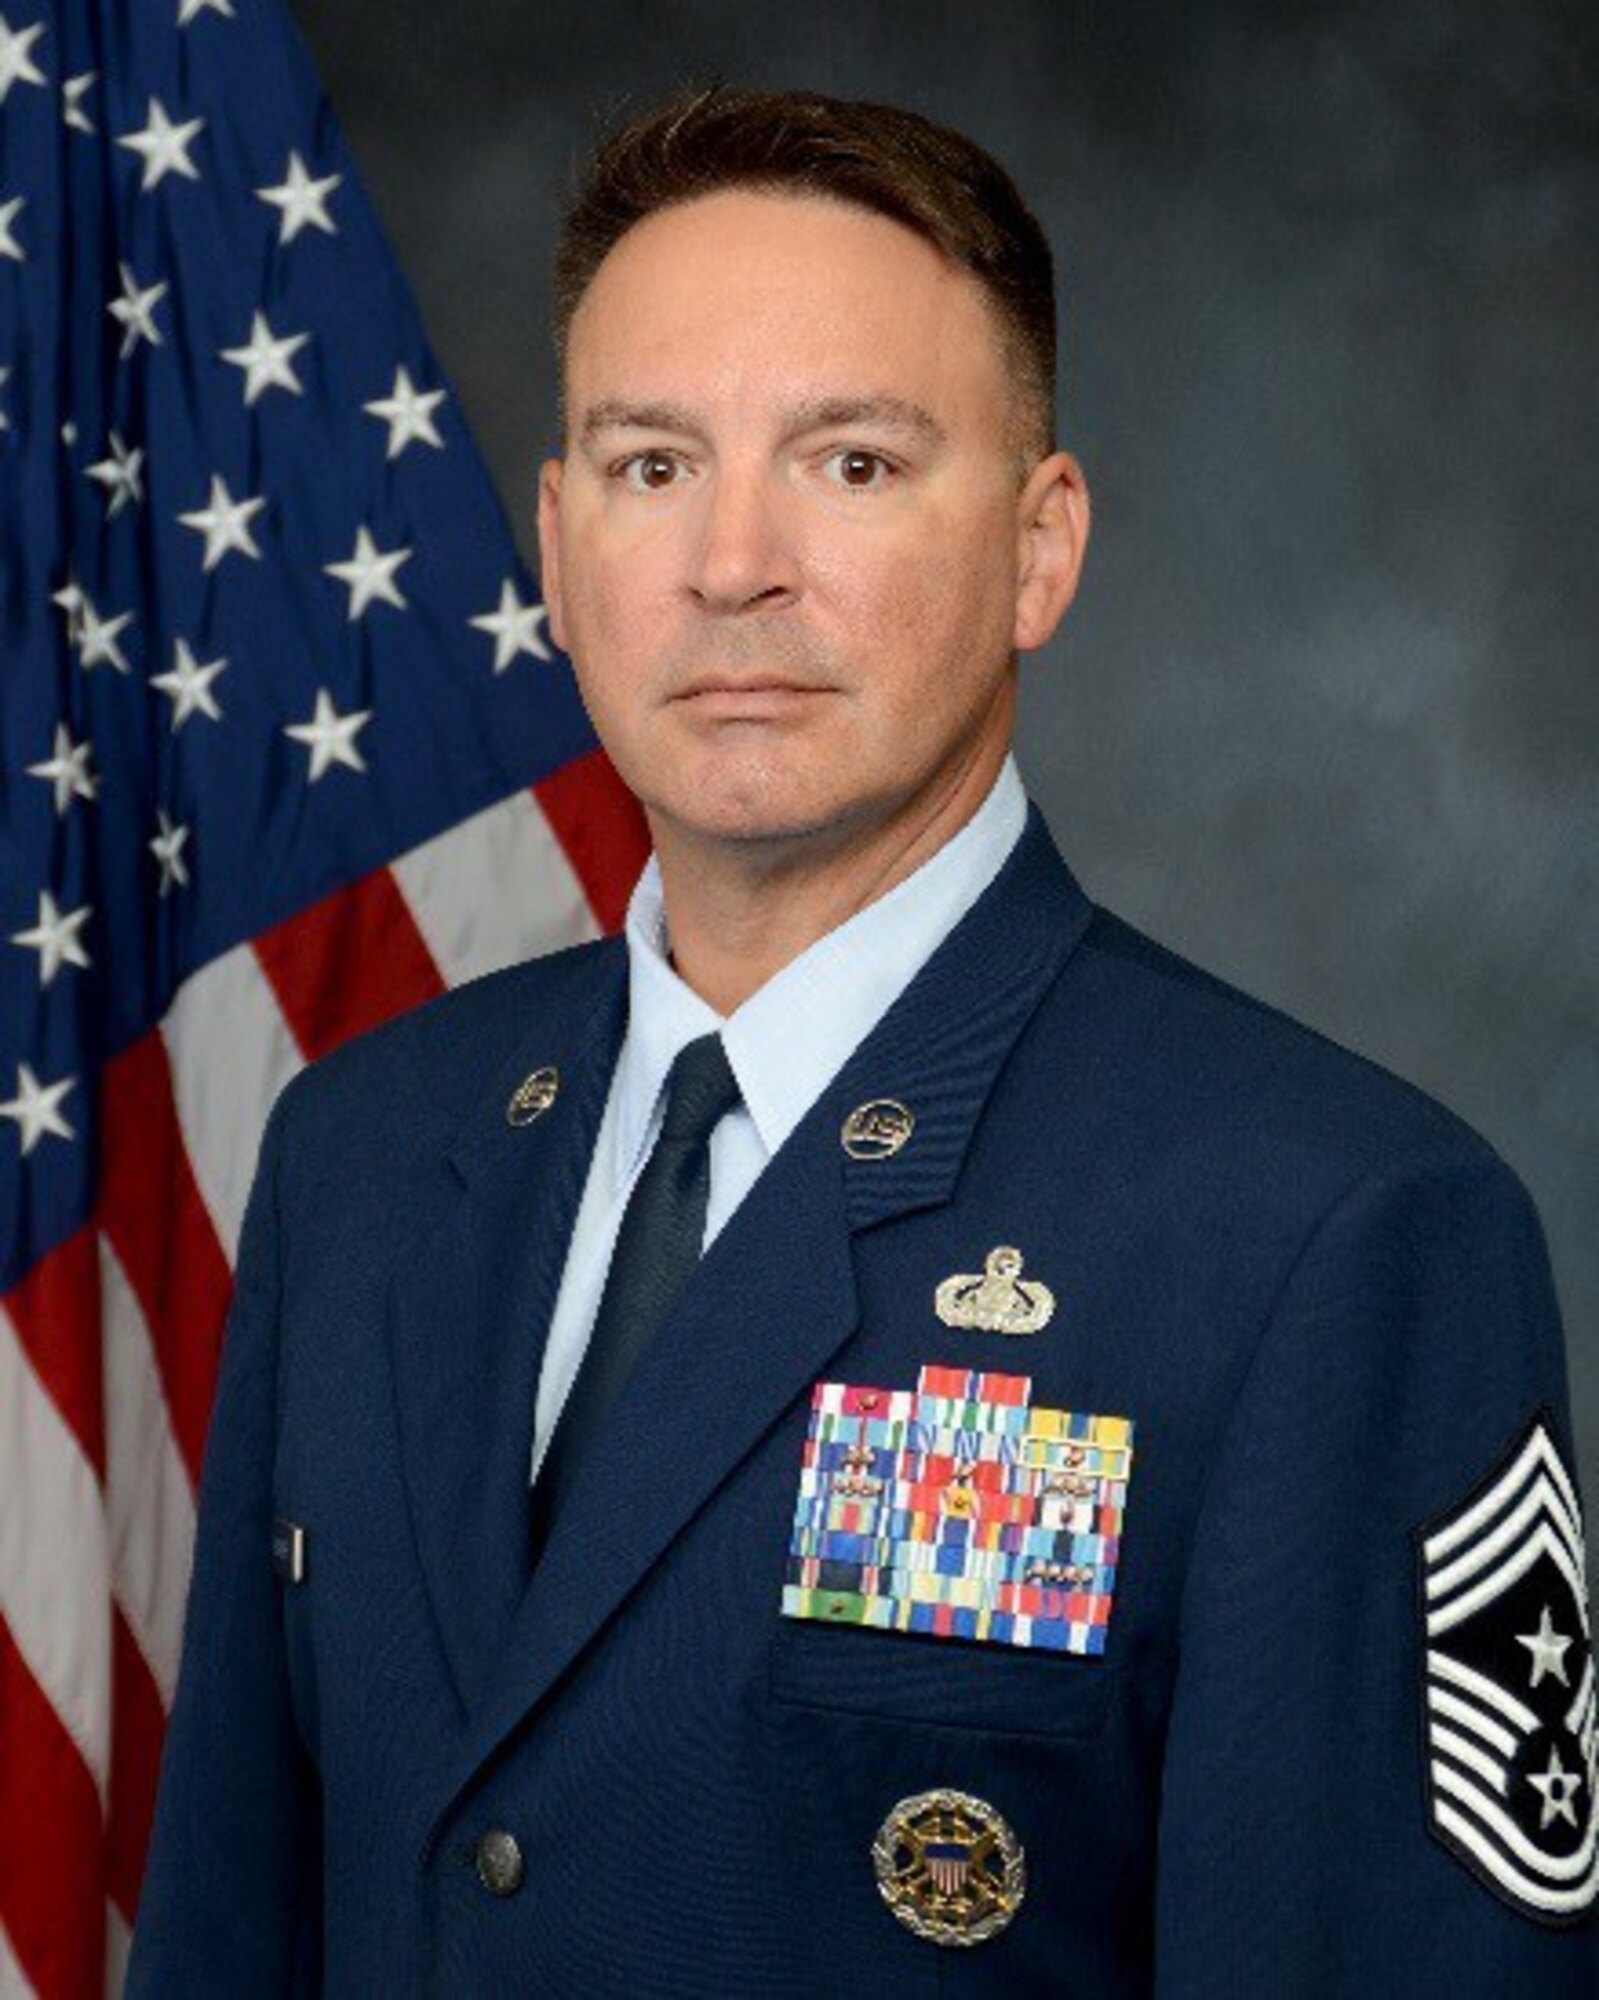 Chief Master Sgt. Brian Bischoff, 960th Cyberspace Wing command chief, stands for an official photo. (U.S. Air Force courtesy photo)